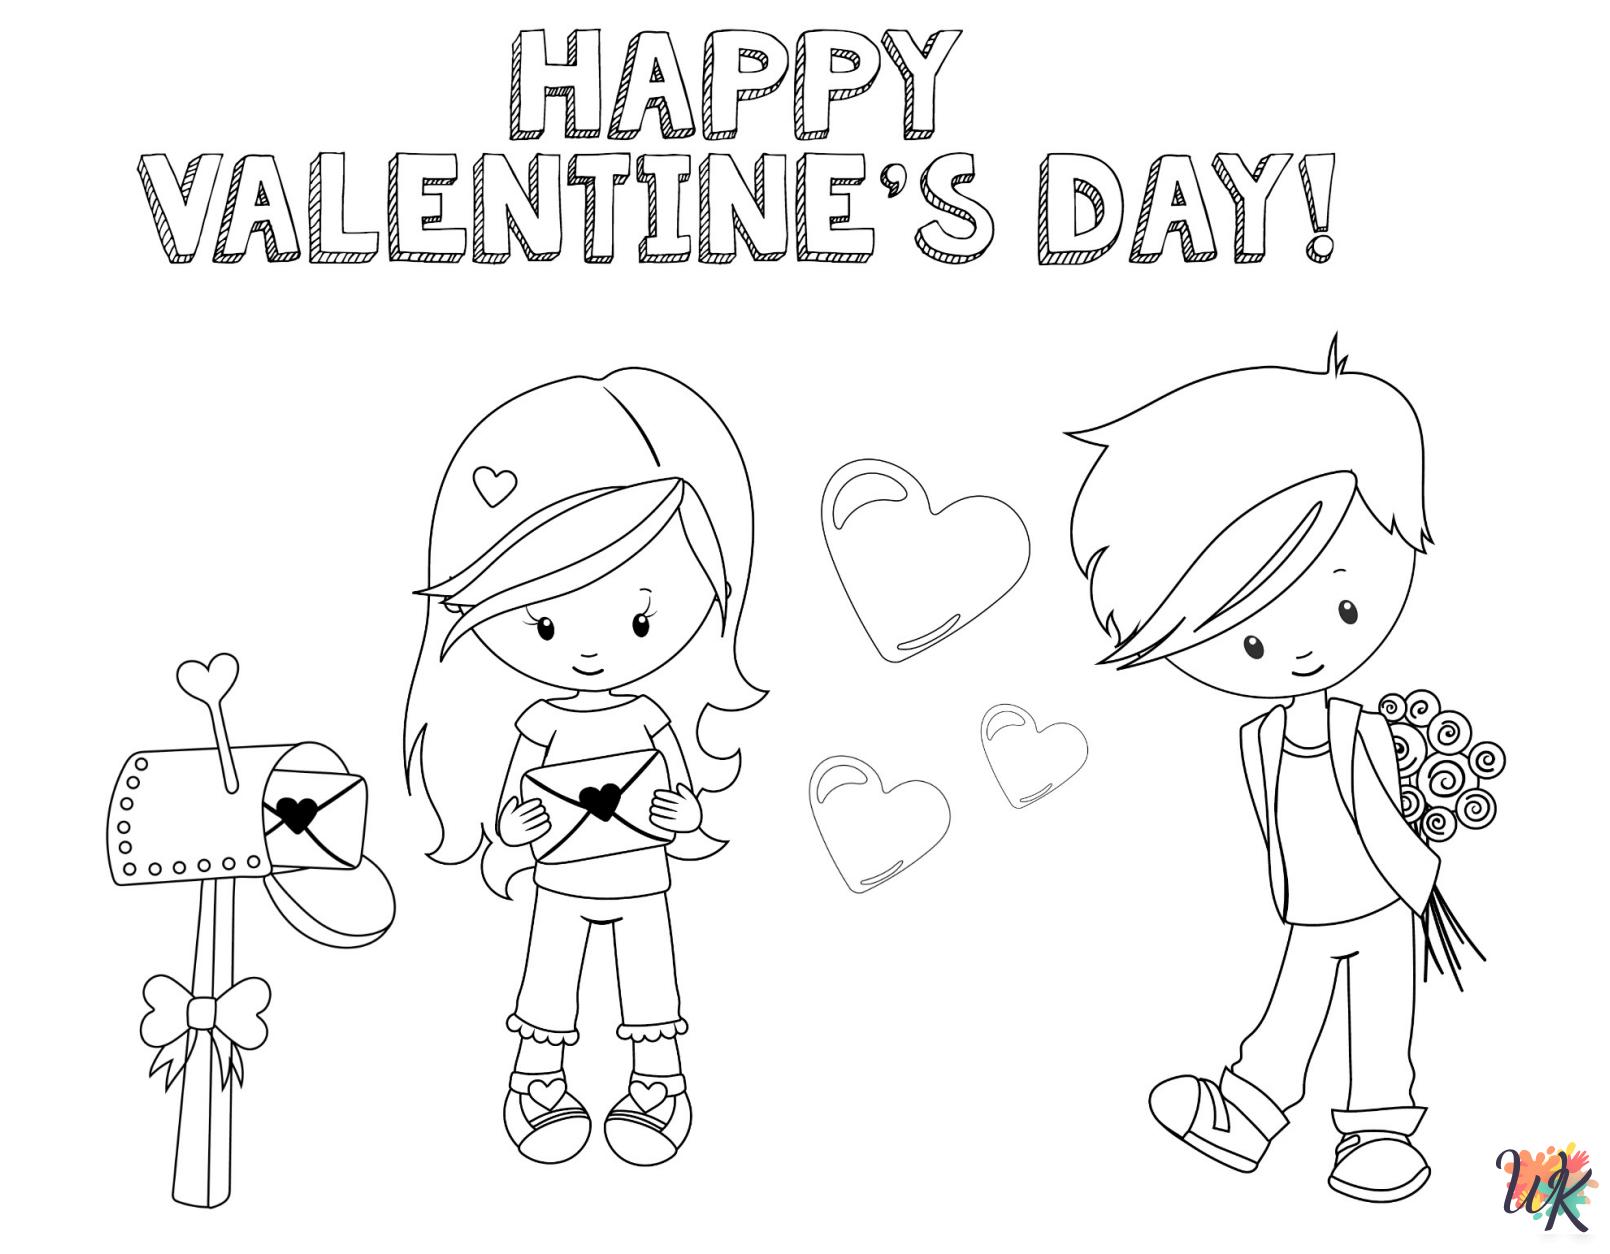 Valentine's Day coloring pages printable free